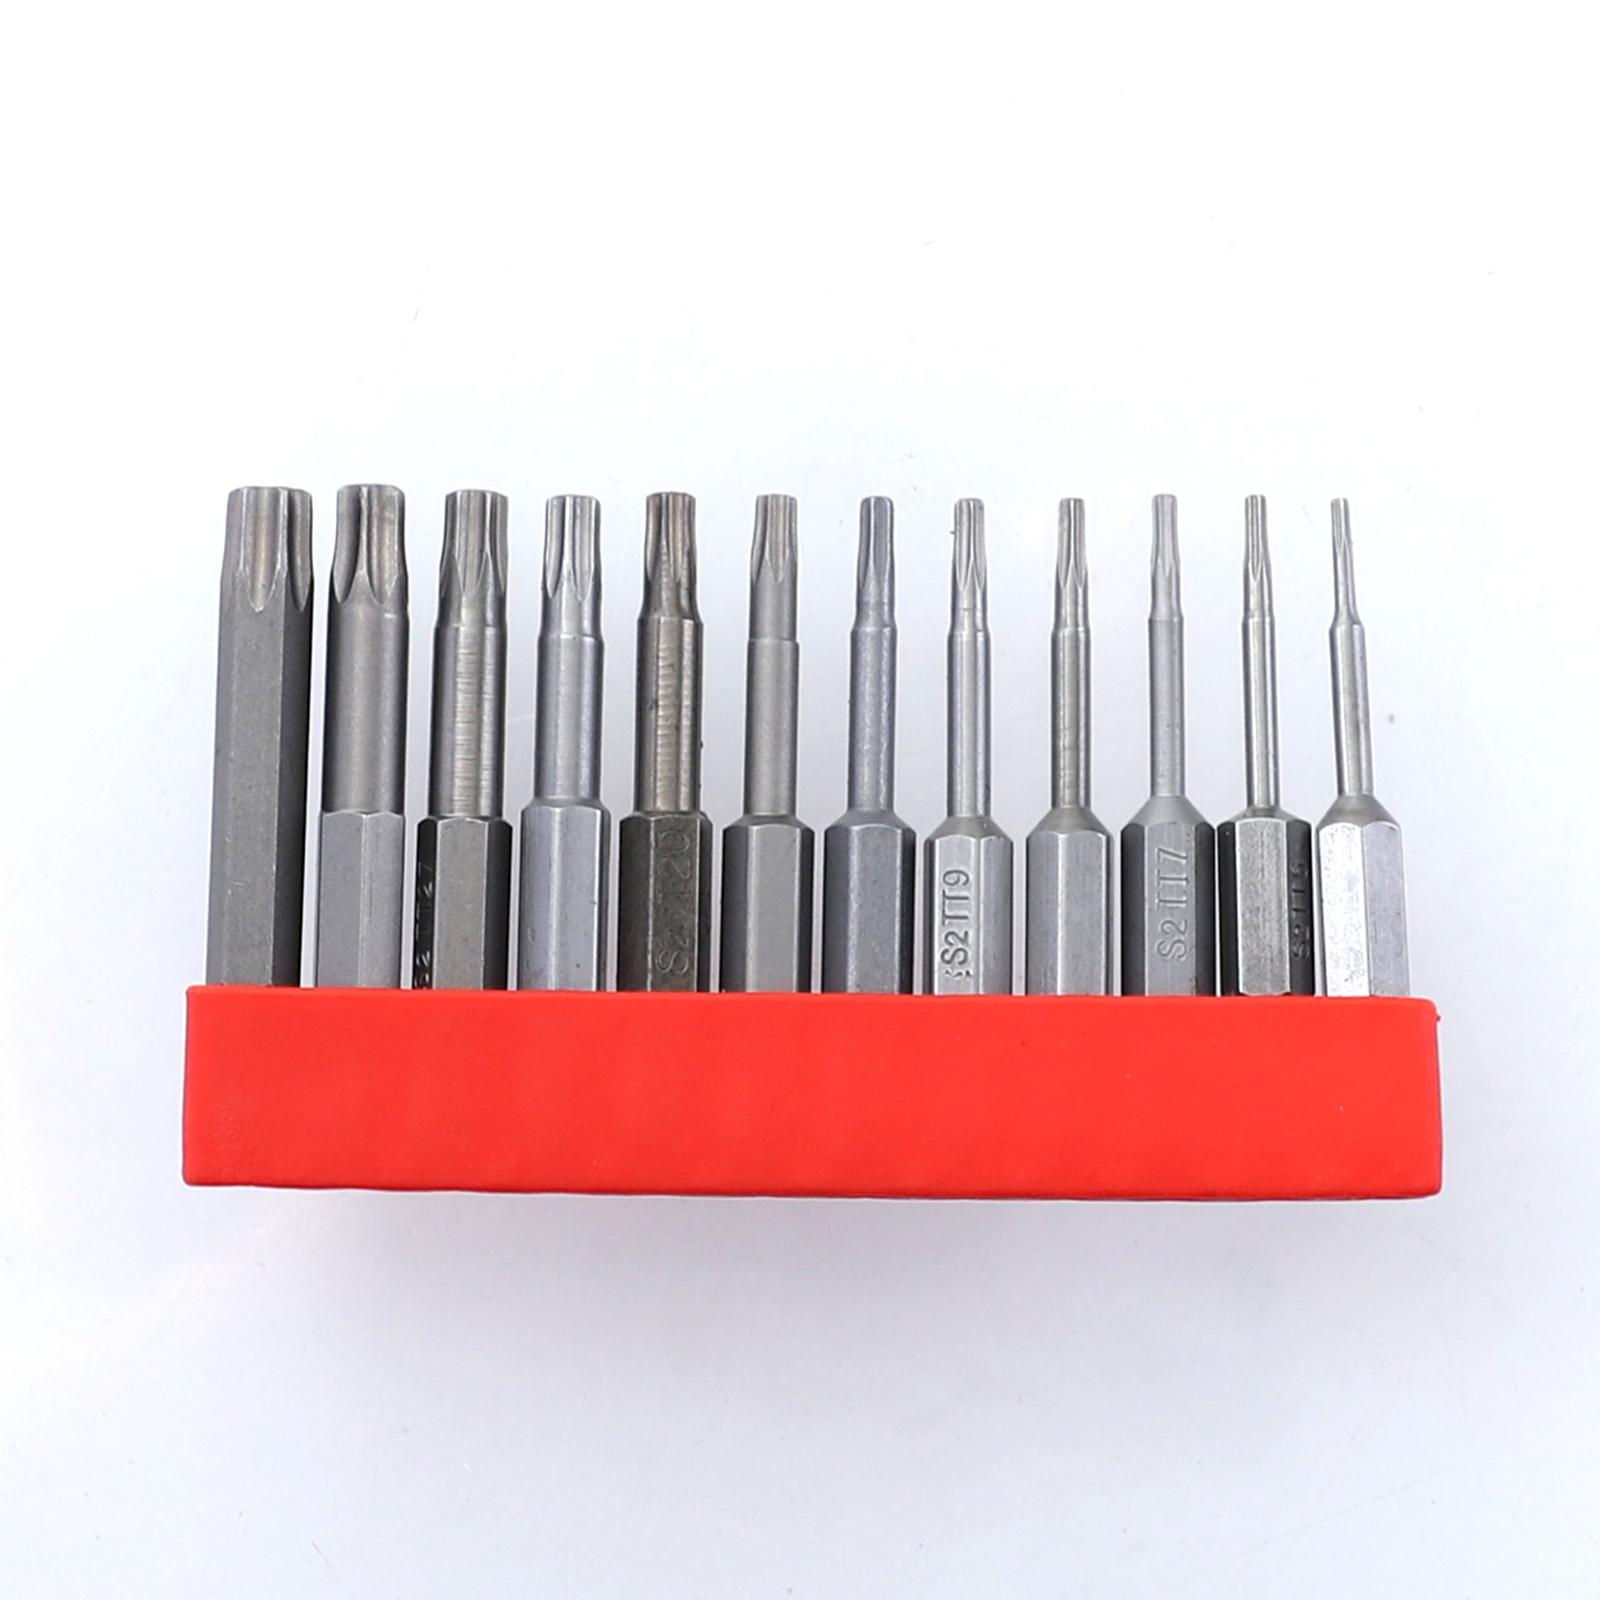 12 Pieces Hollow Rings Wrench Bit Set S2 Alloy Steel Metric for Metalworking 50mm